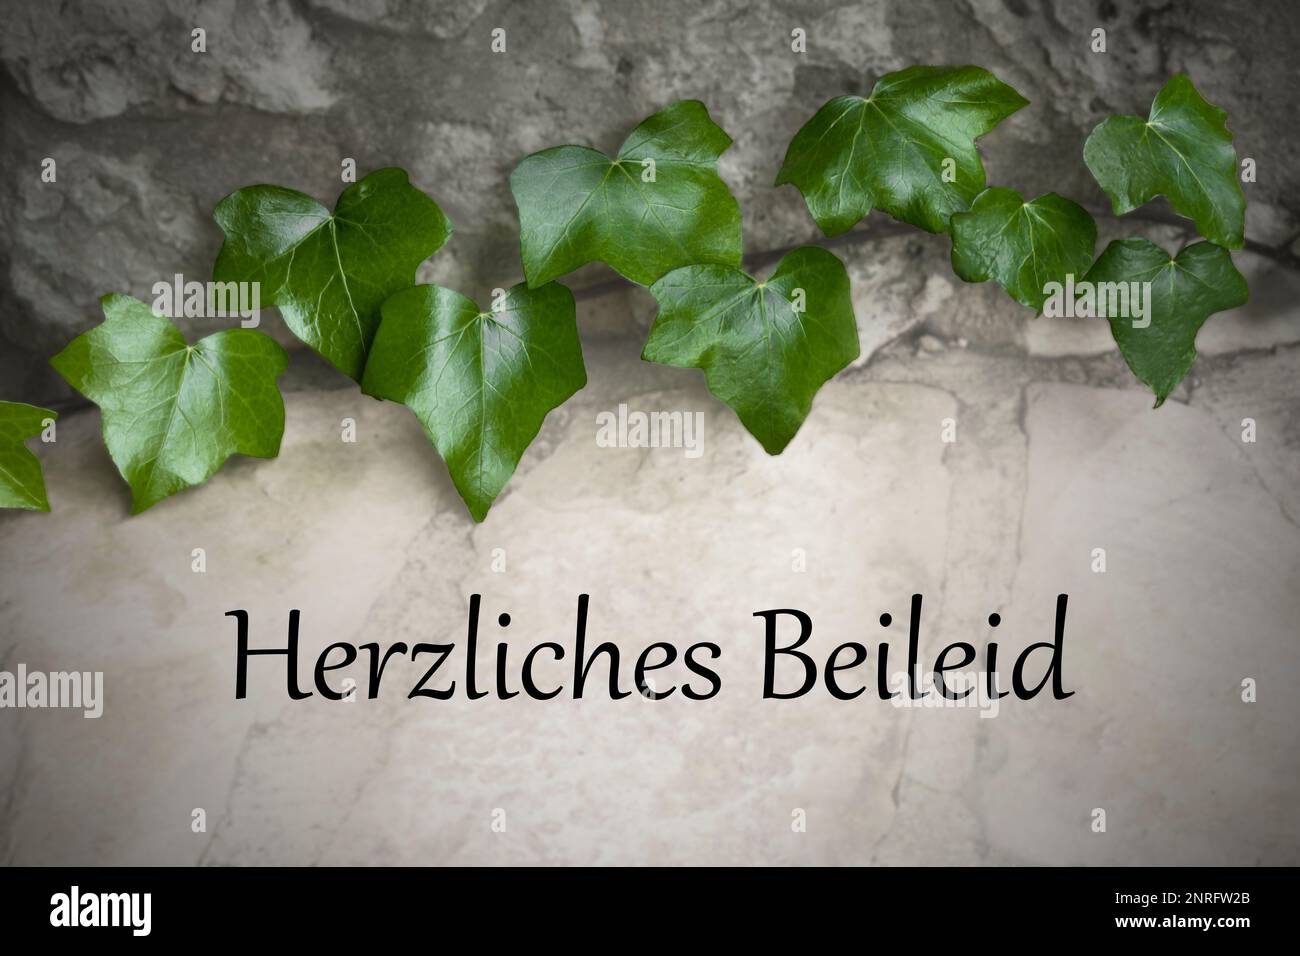 Green ivy on grey stone with german text Herzliches Beileid, meaning: with heartfelt sympathy. Mourning or condolences picture dummy for Germany. Stock Photo